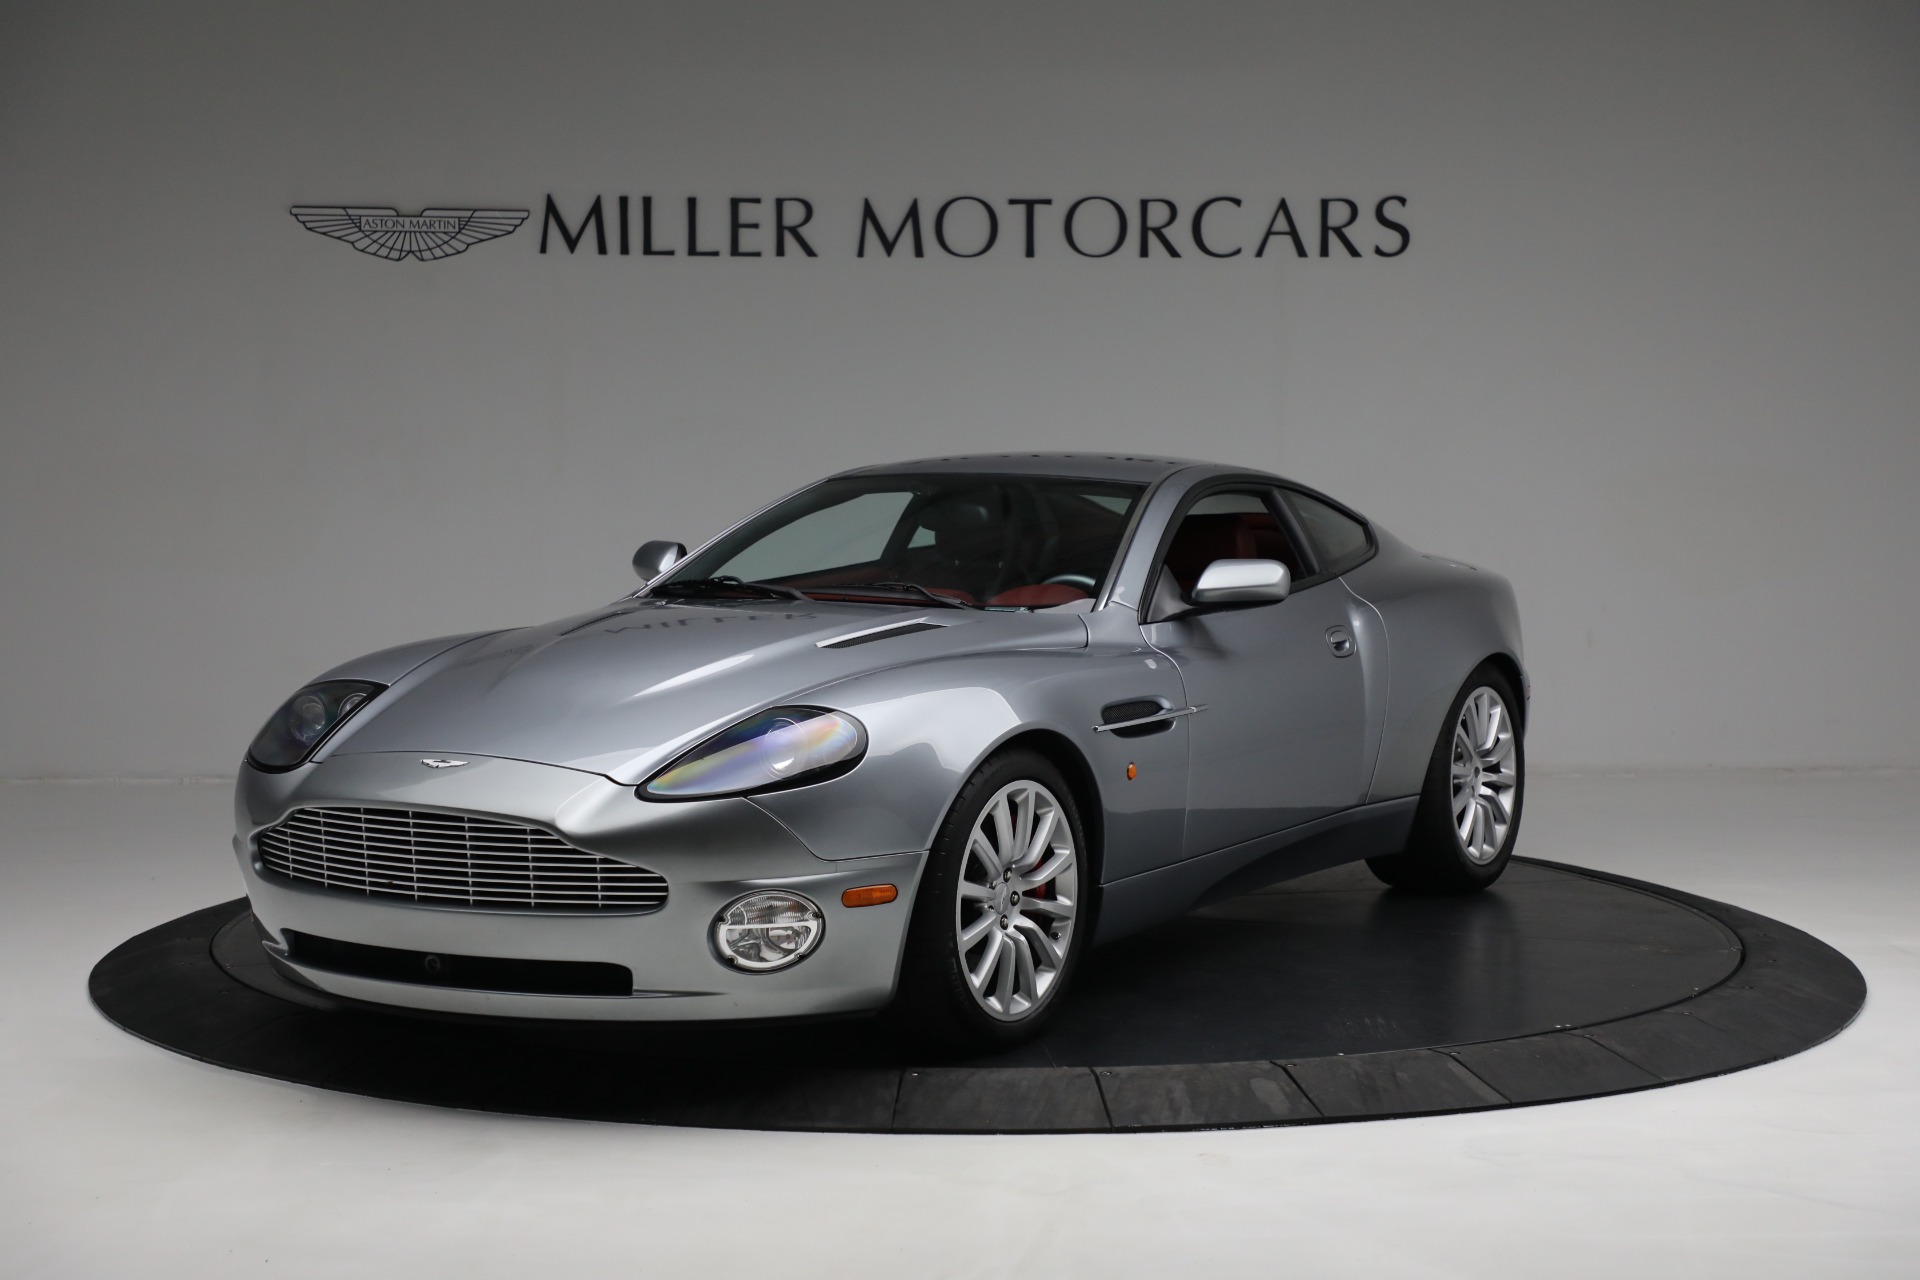 Used 2003 Aston Martin V12 Vanquish for sale $99,900 at Rolls-Royce Motor Cars Greenwich in Greenwich CT 06830 1